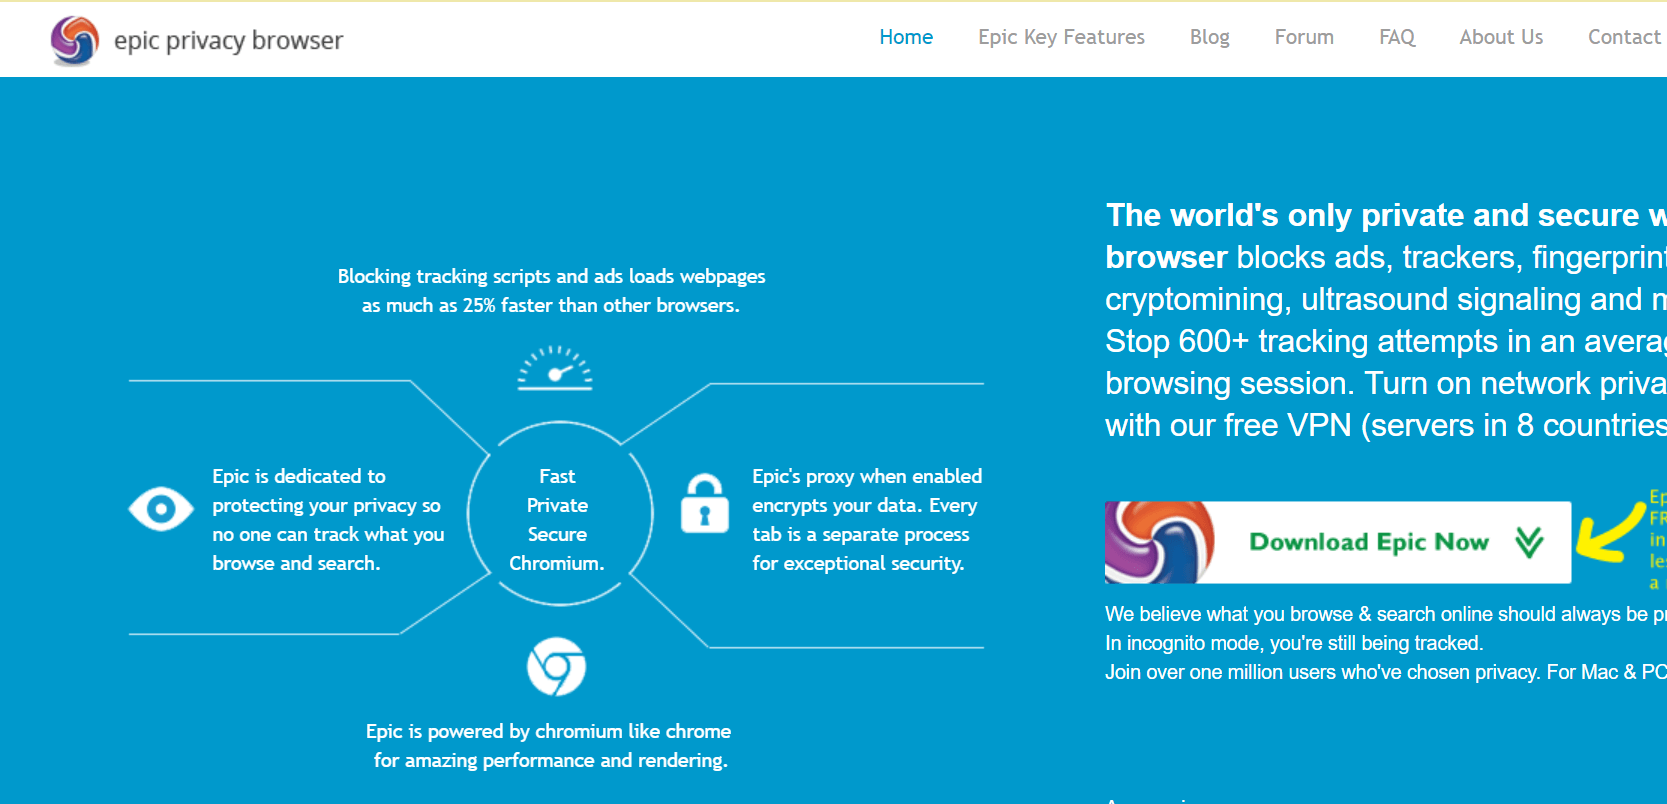 Epic Privacy Browser